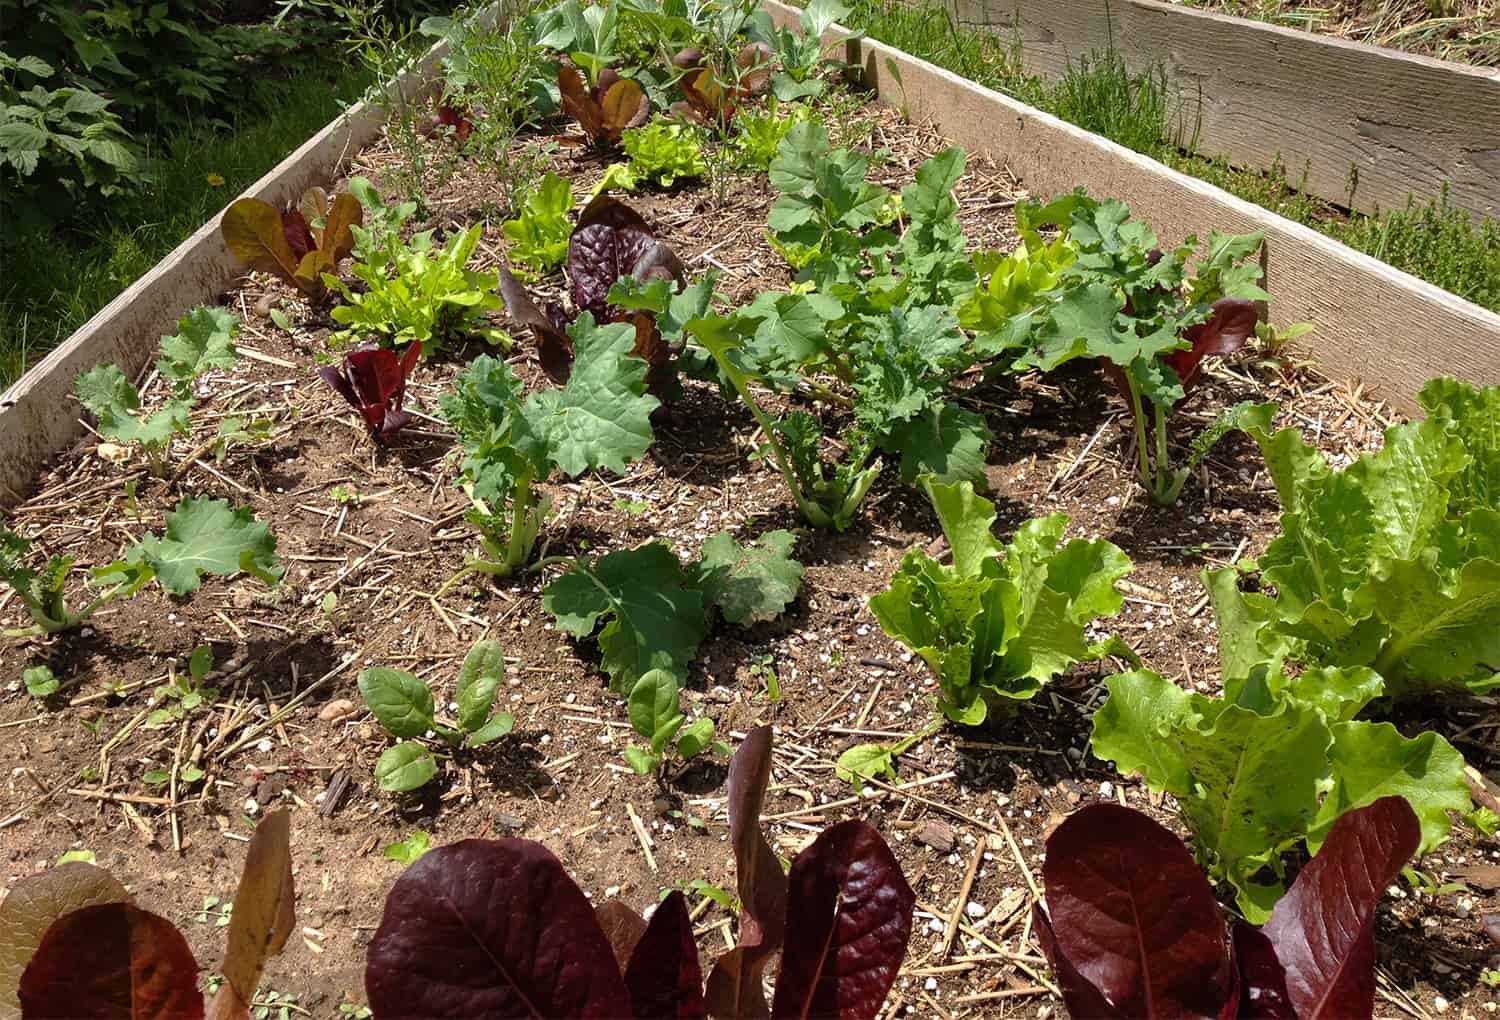 Image of Spinach and lettuce plants